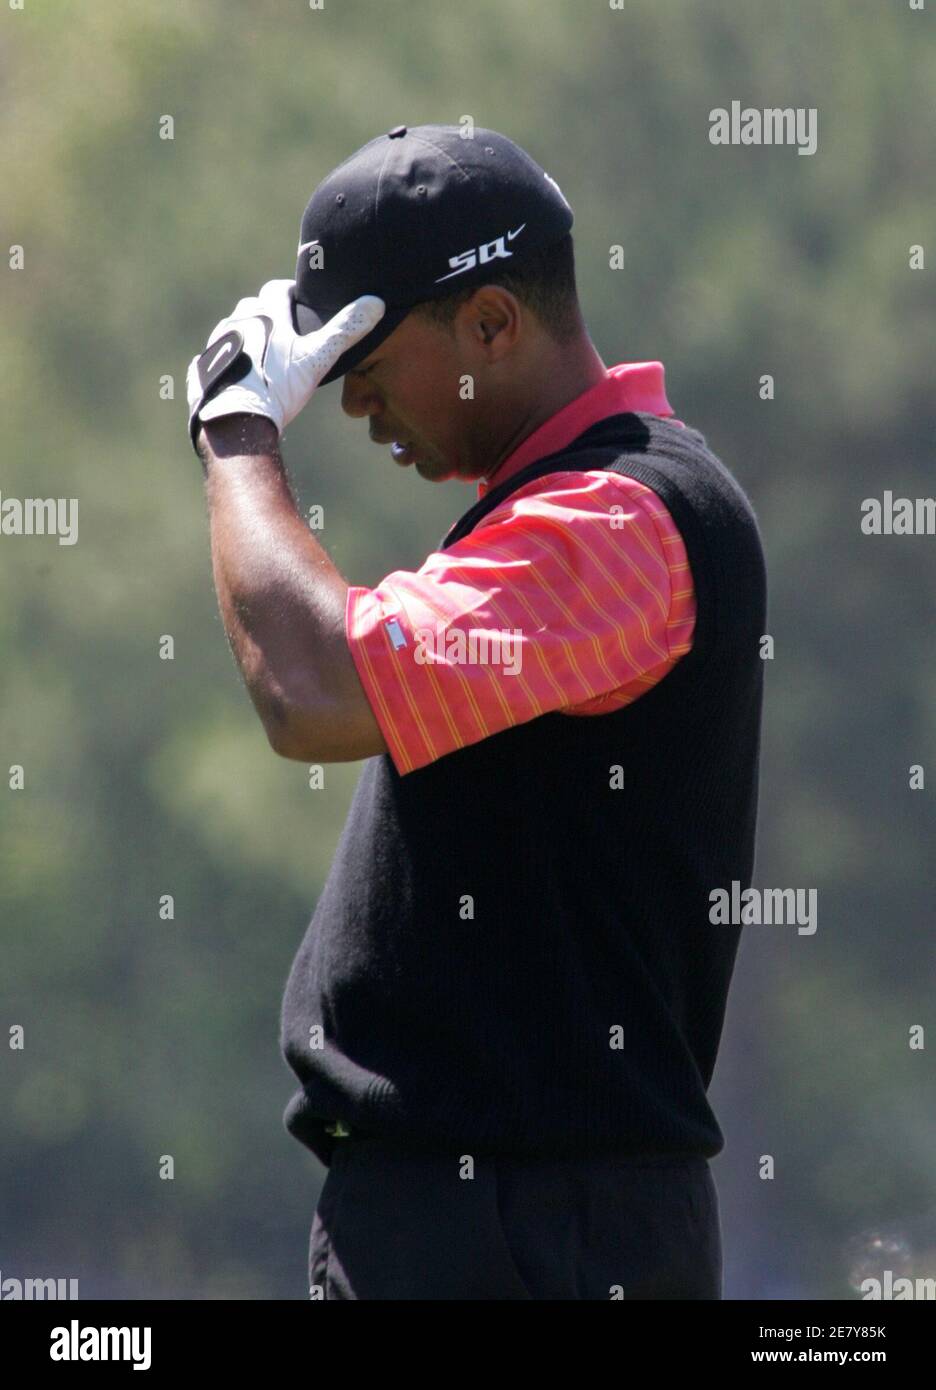 Tiger Woods of the U.S. reacts after hitting into a sand trap on the seventh hole during the final round at the Players Championship golf tournament in Ponte Vedra Beach, Florida March 26, 2006. REUTERS/Rick Fowler Stock Photo